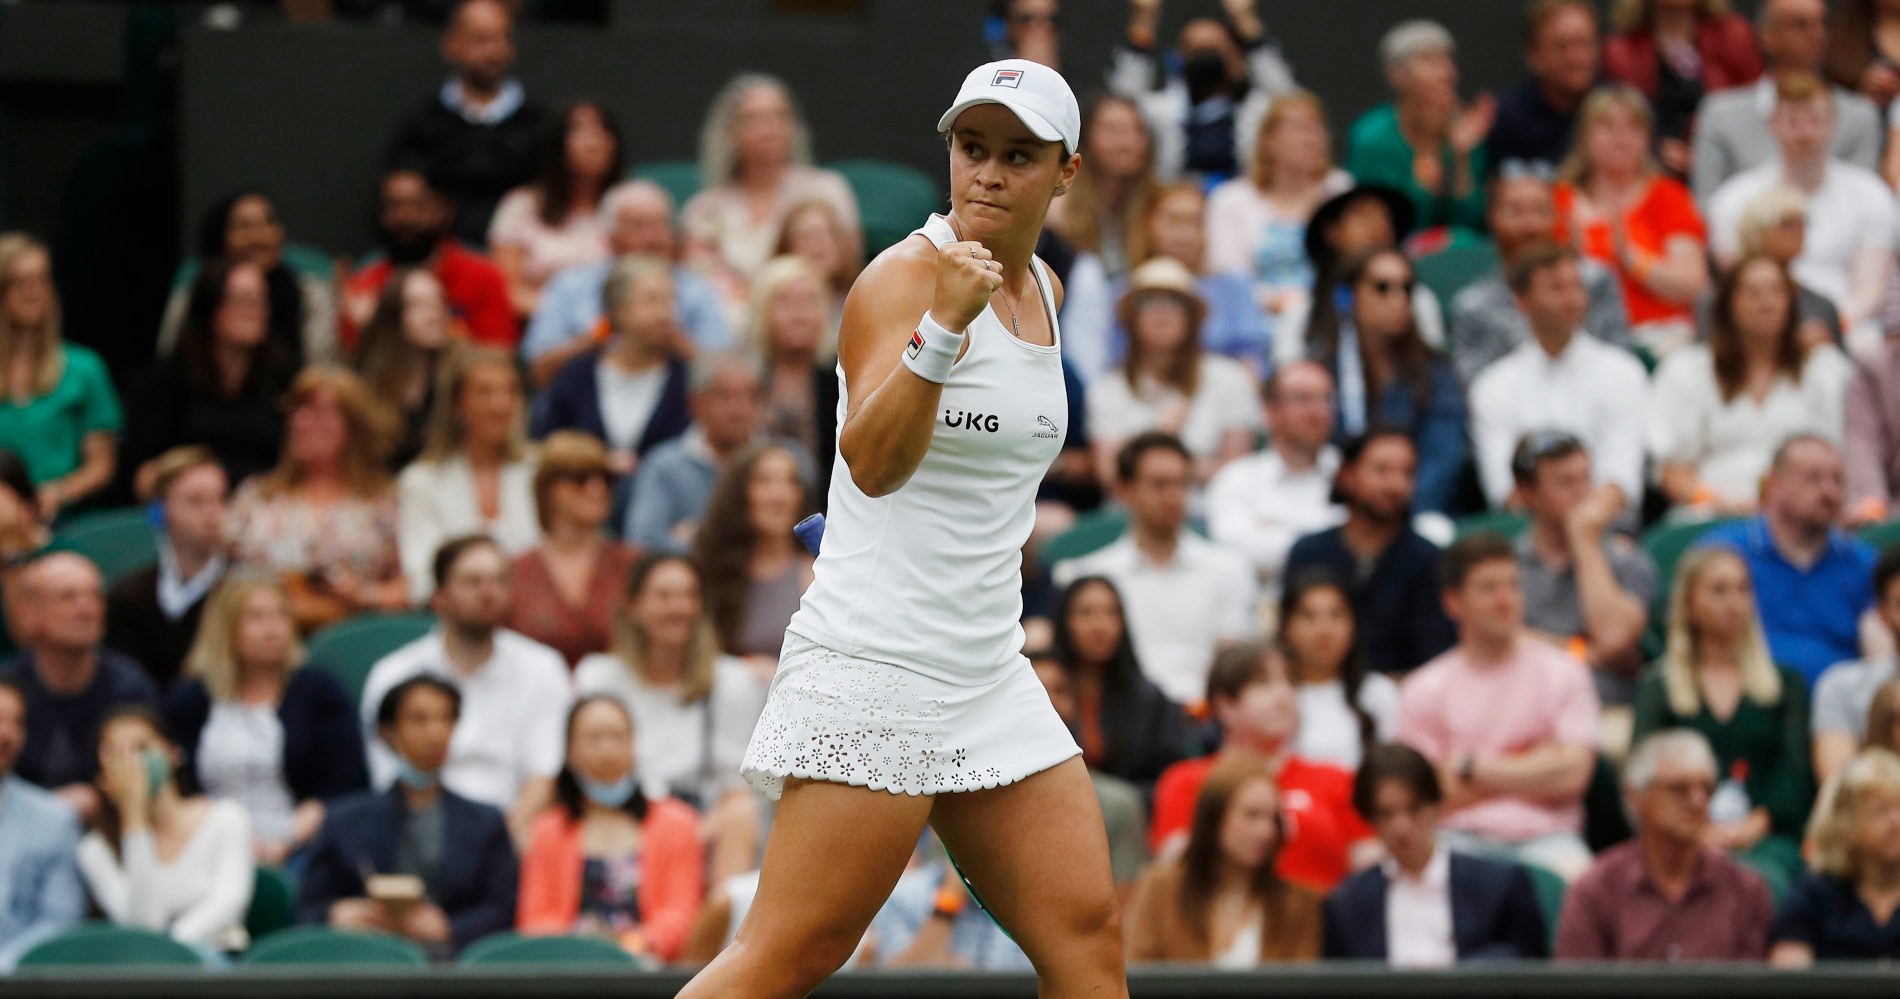 Top-seeded Barty marches past Siniakova and into round two